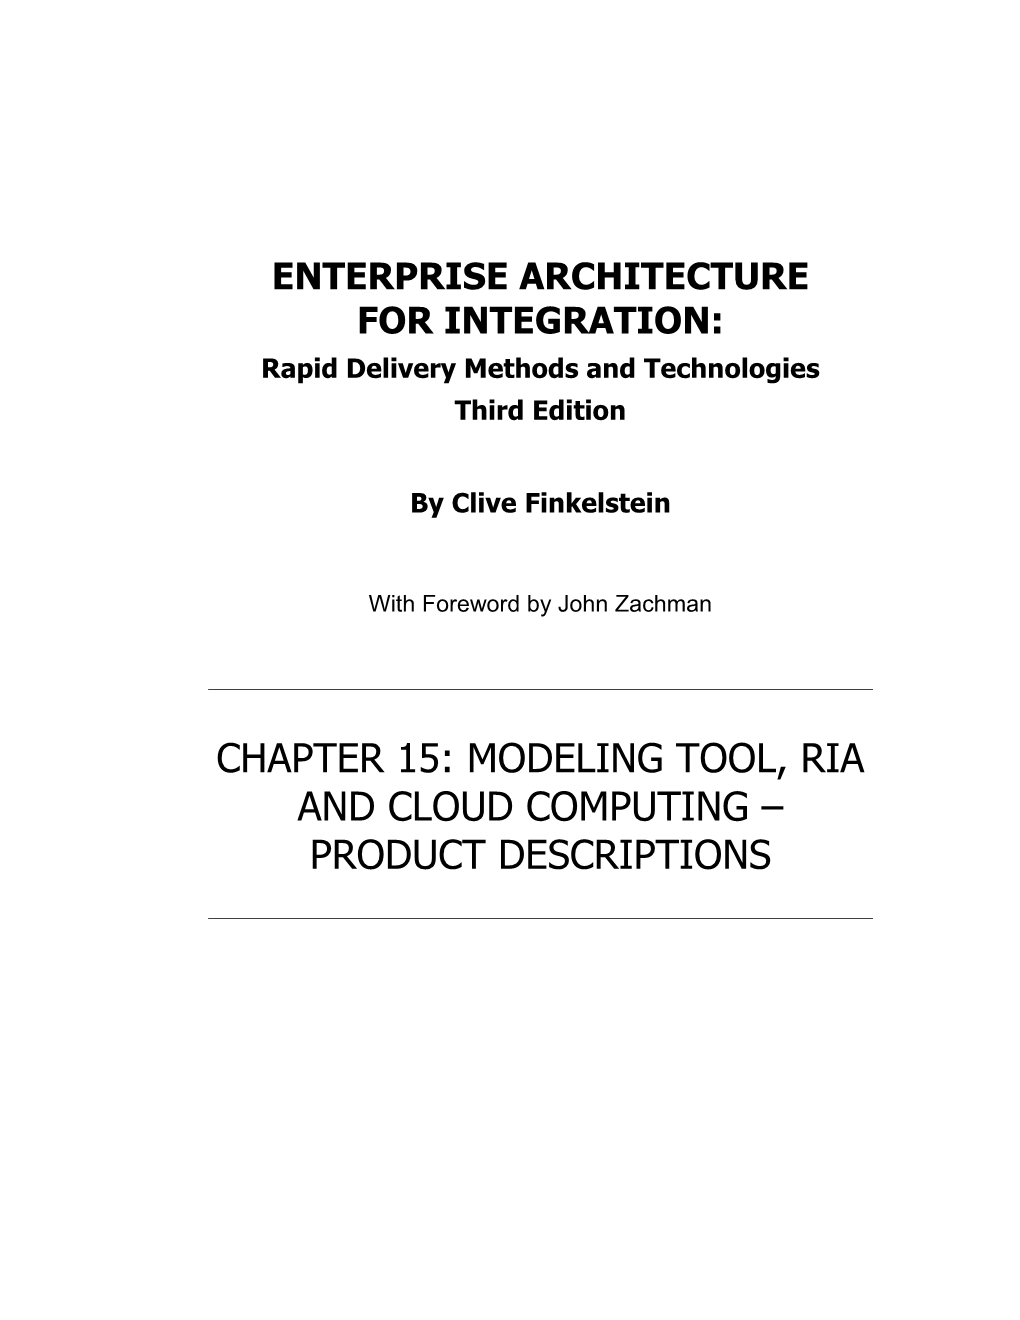 MODELING TOOL, RIA and CLOUD COMPUTING – PRODUCT DESCRIPTIONS Chapter 13: Modeling Tool, RIA and Cloud Computing Products I